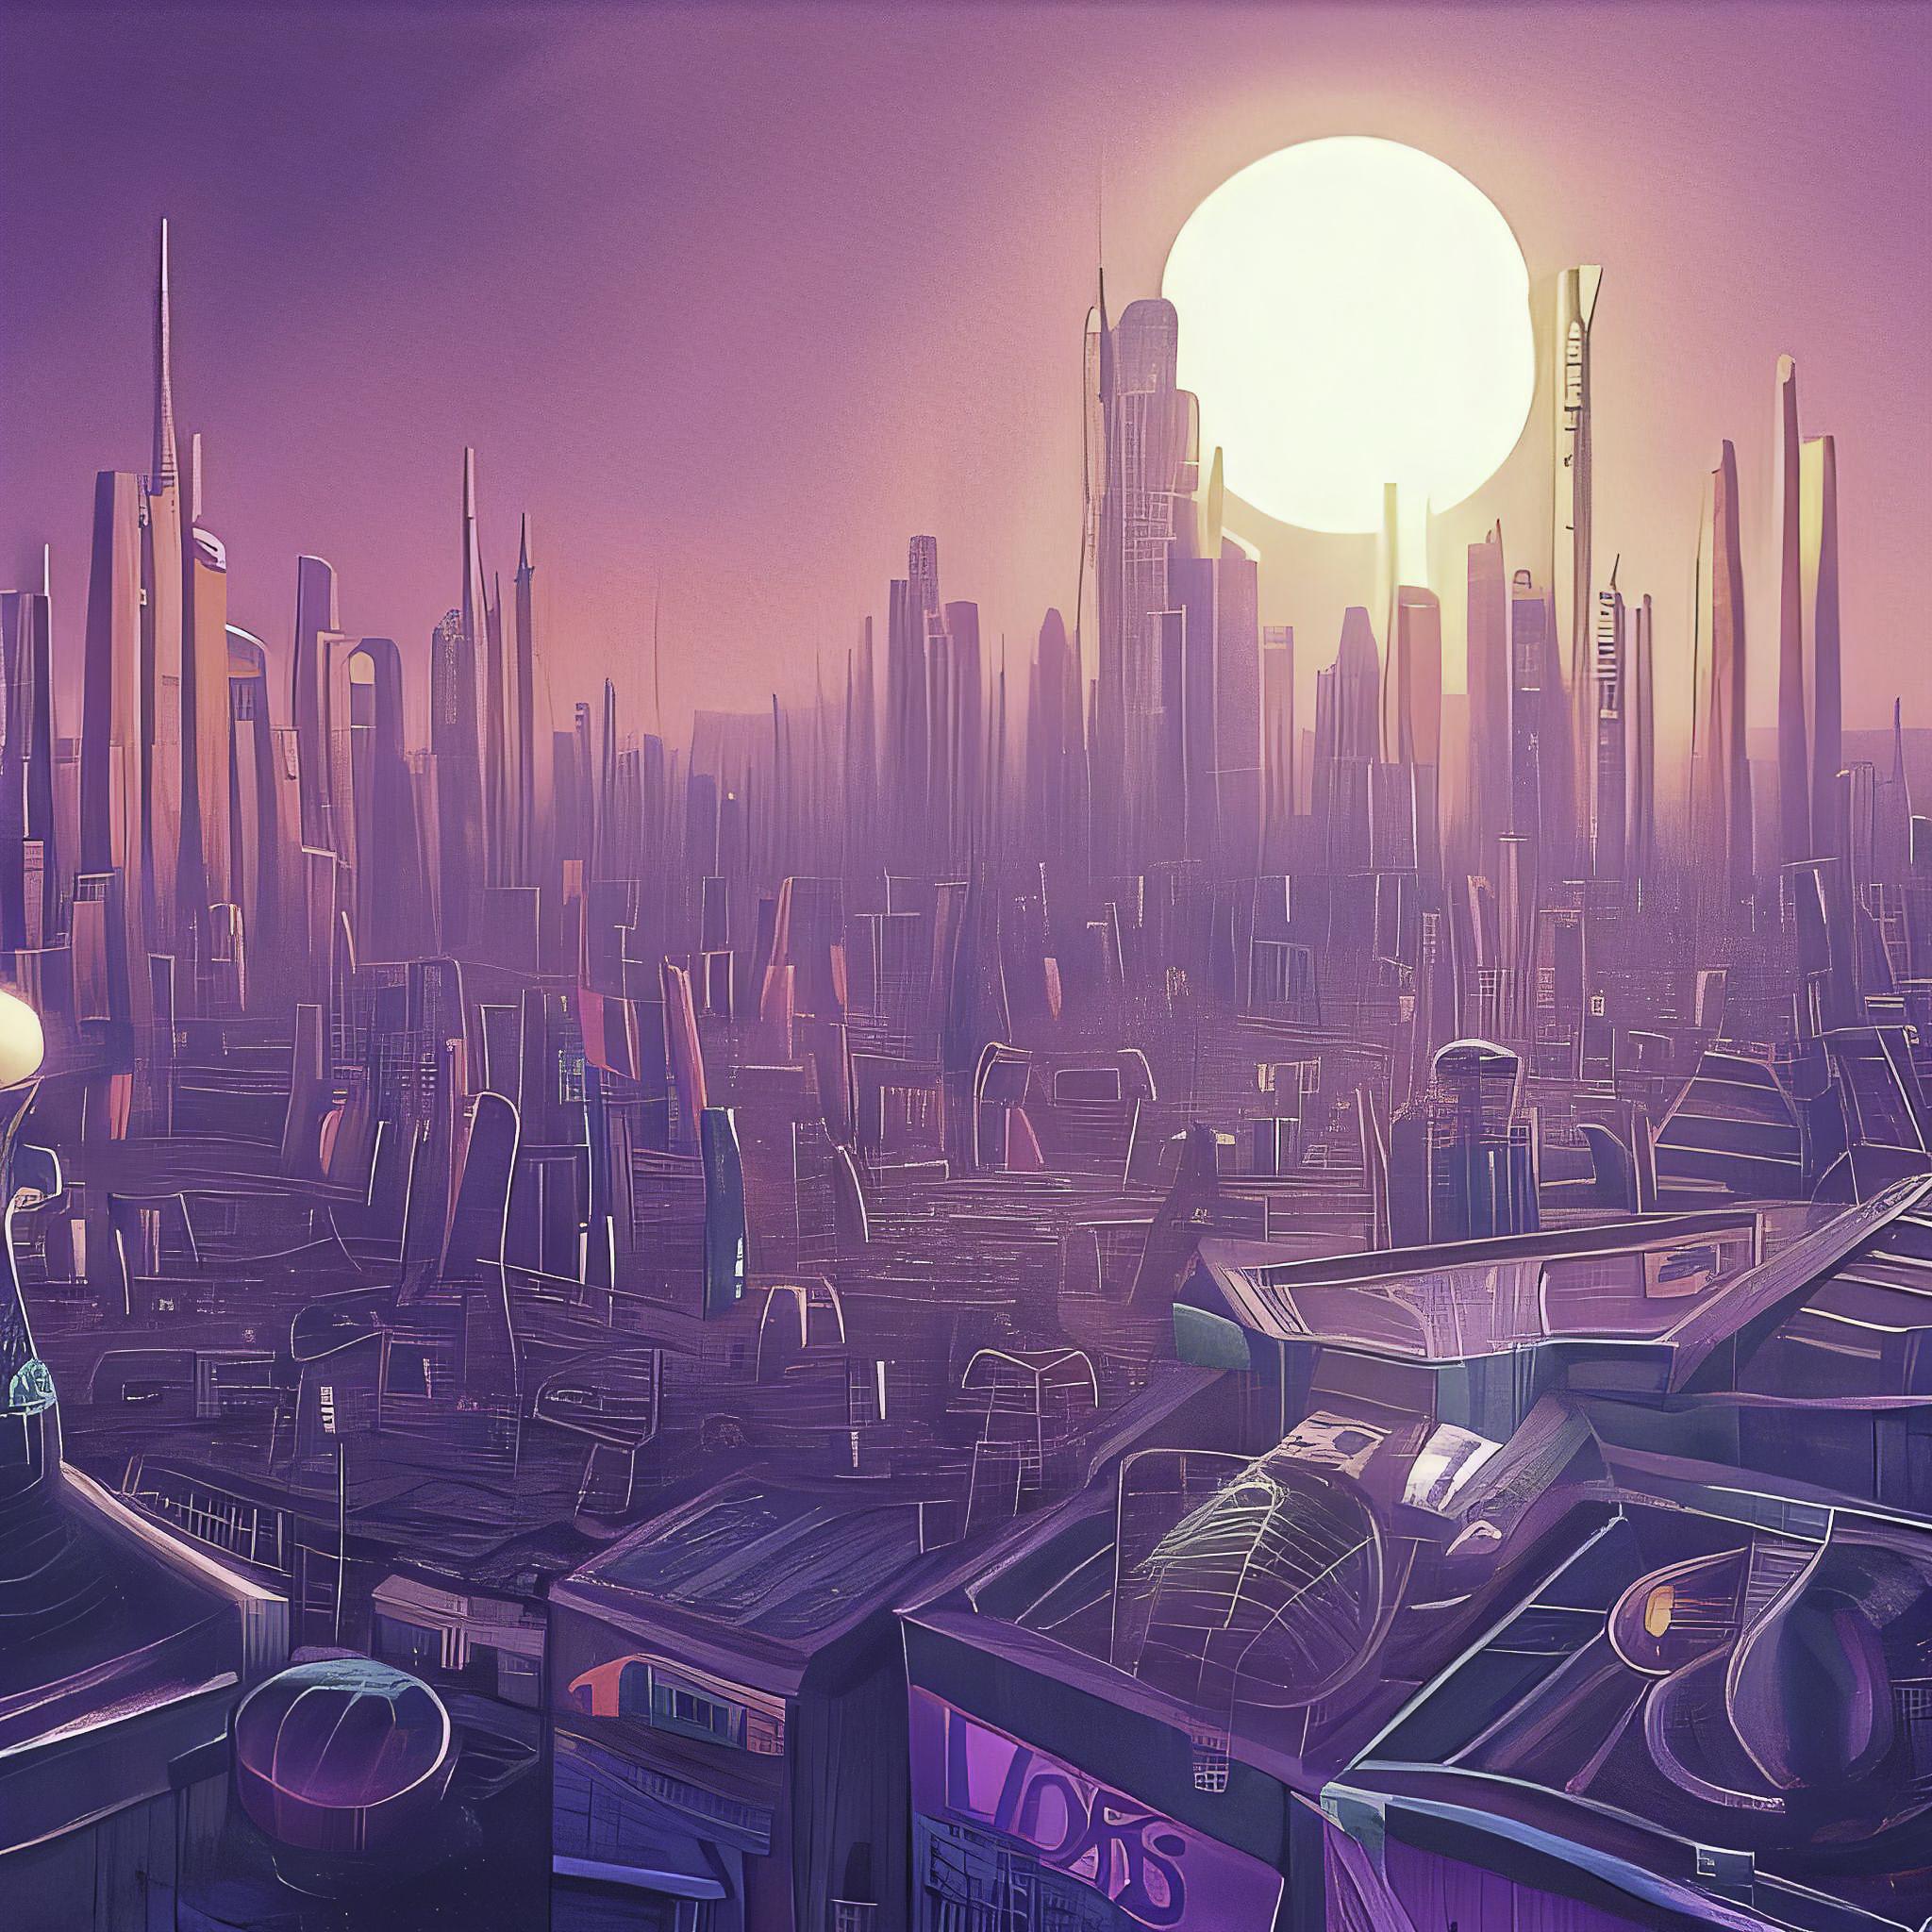 ComfortCityscapeDrawing 001